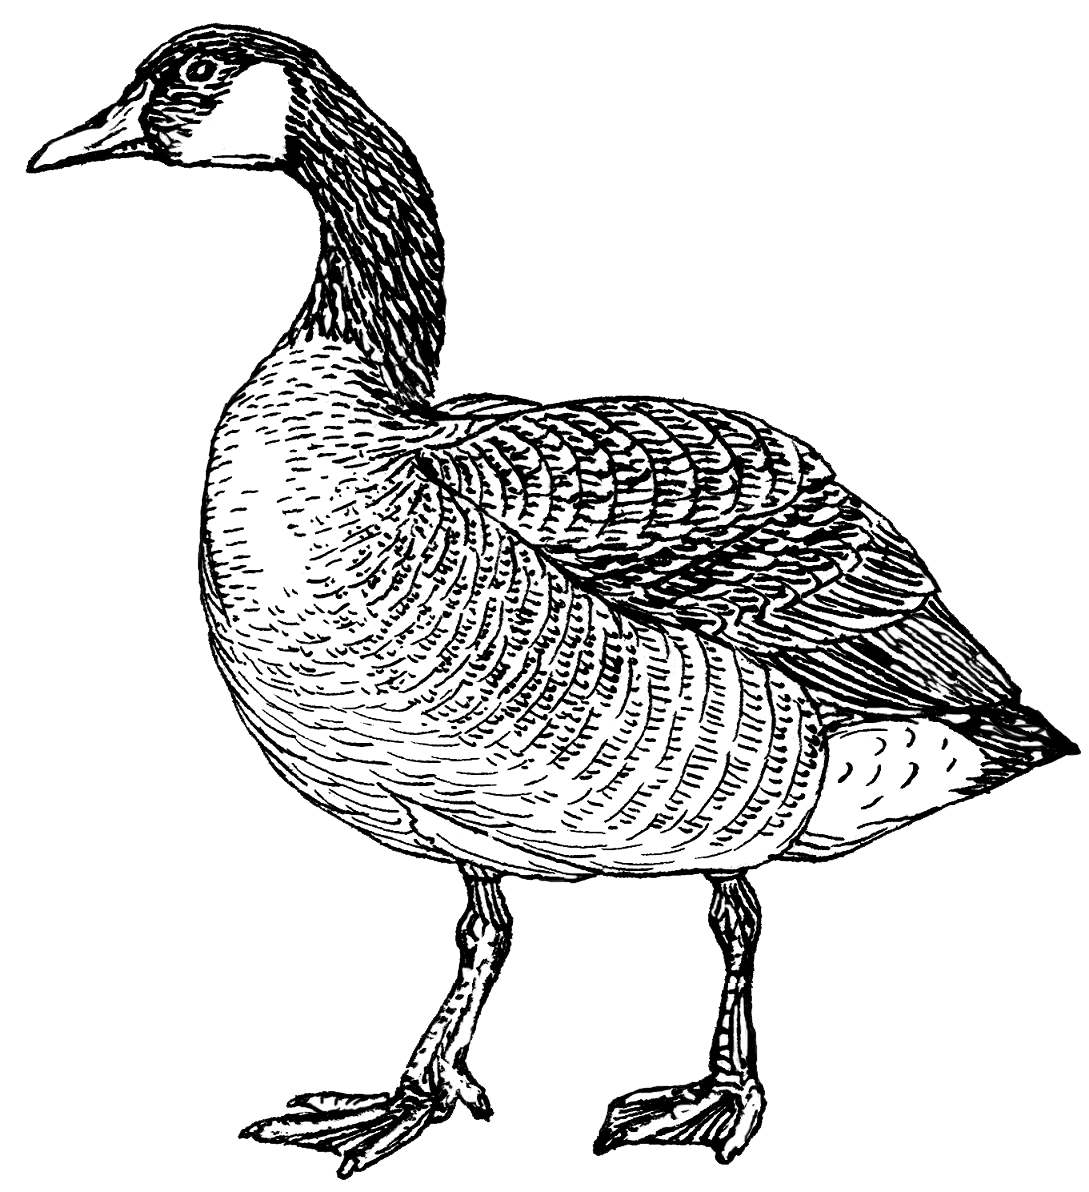 Goose psf commons clipart free